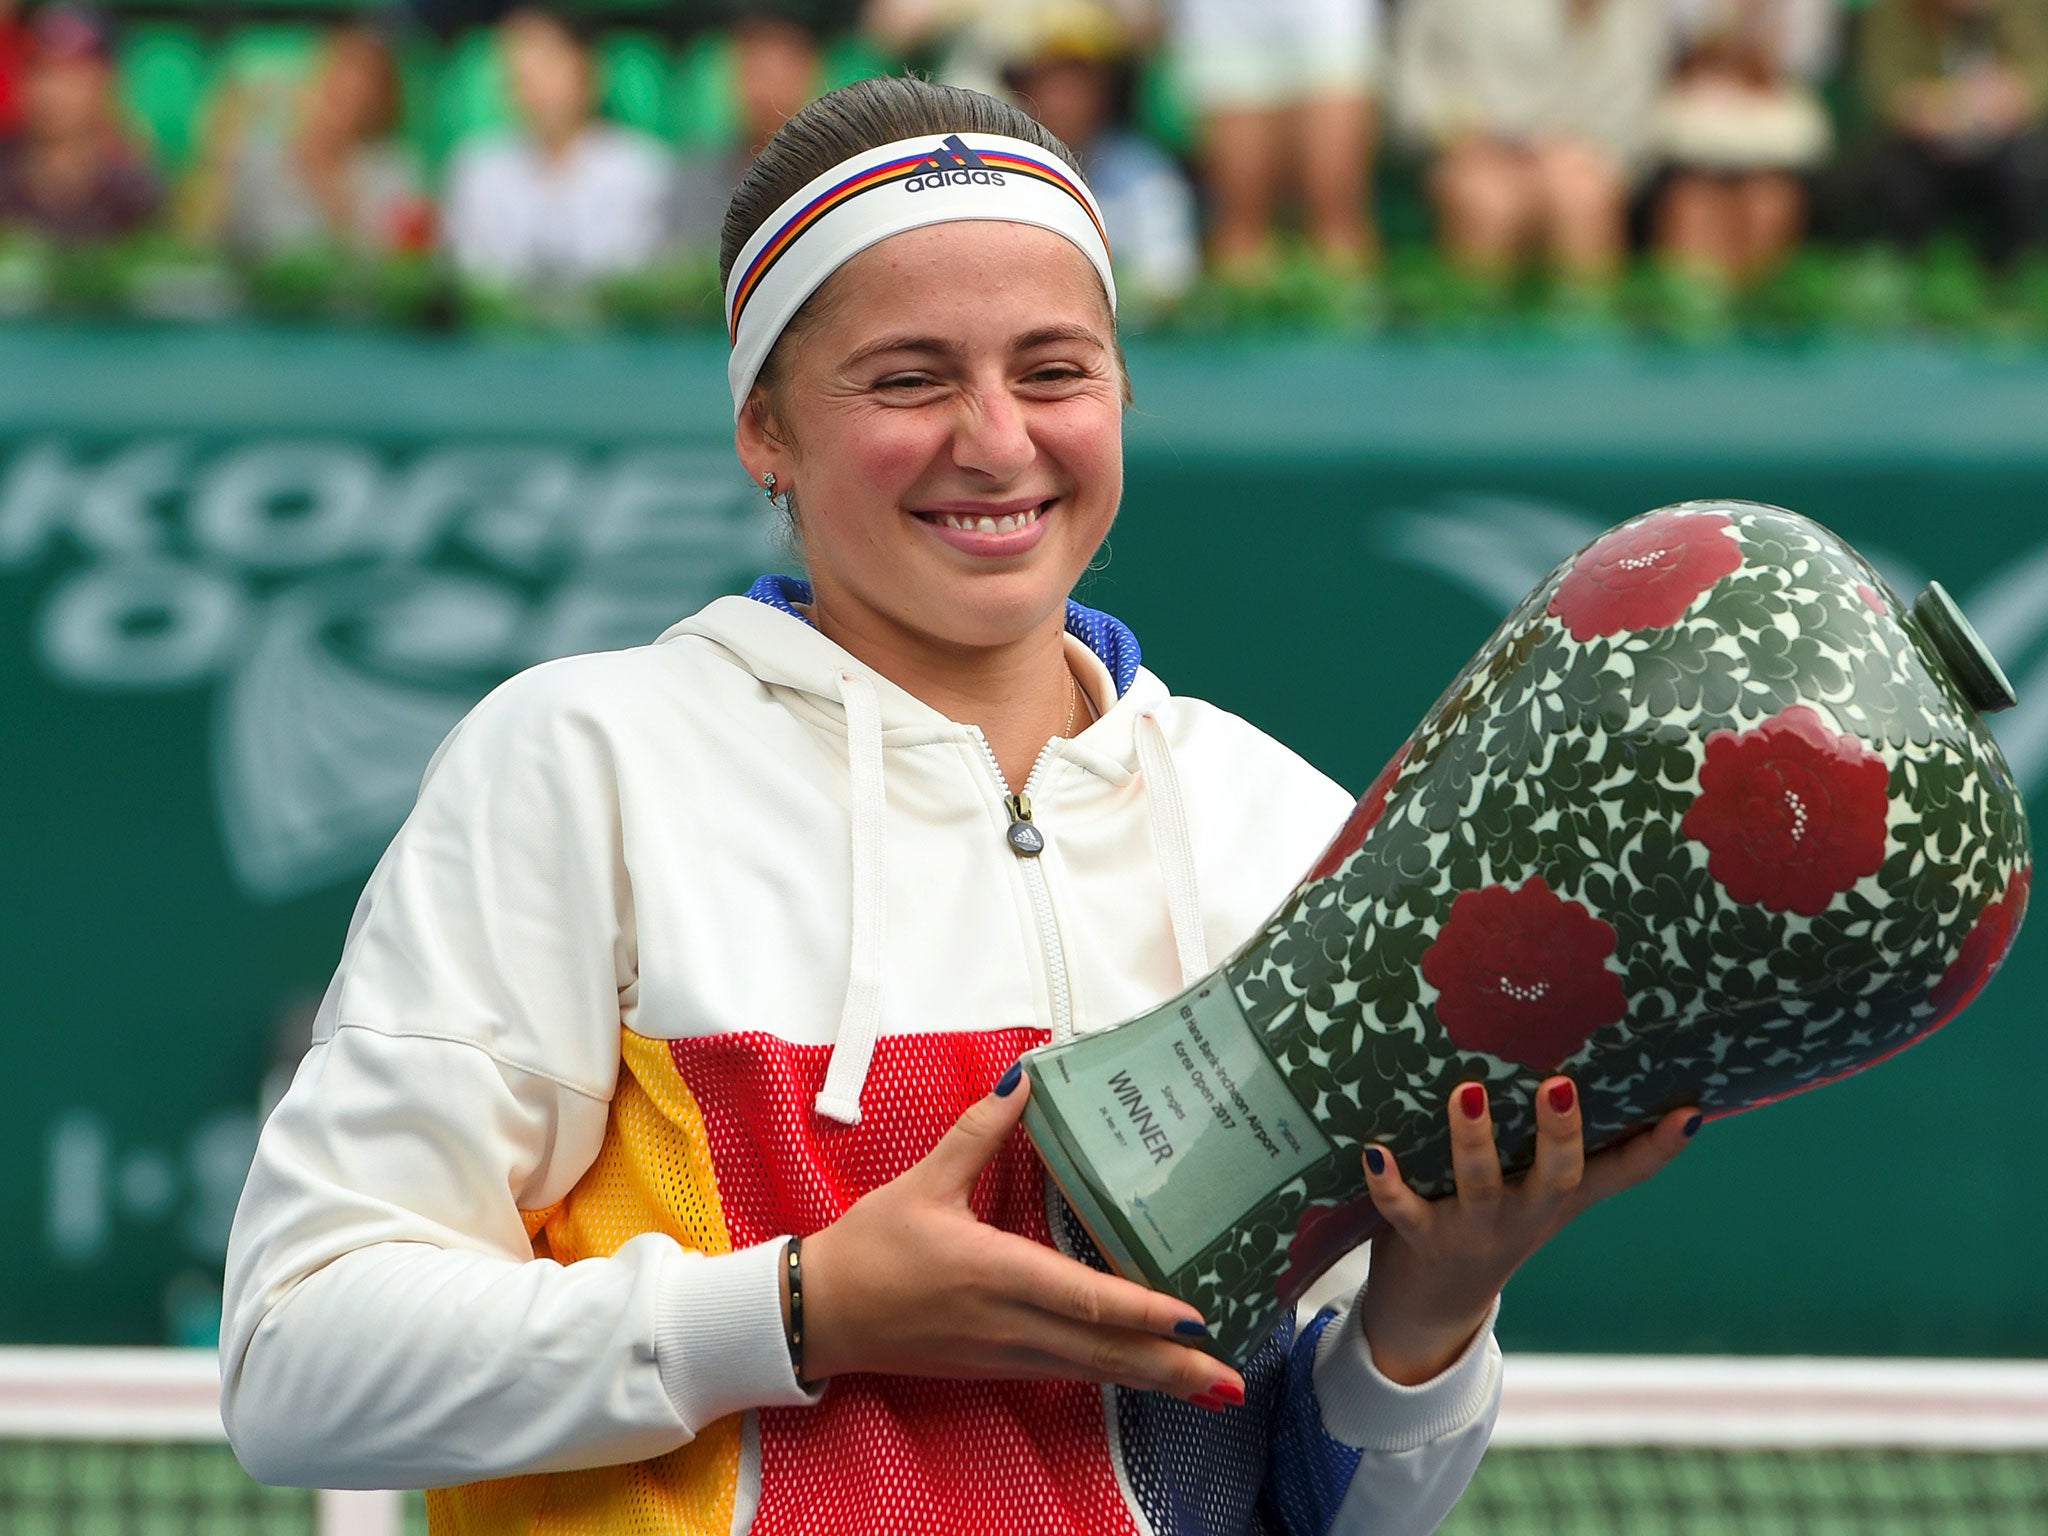 Since her success at last year’s French Open, Ostapenko has won just won title (in Seoul last September) but the youngster has consistently played well since the